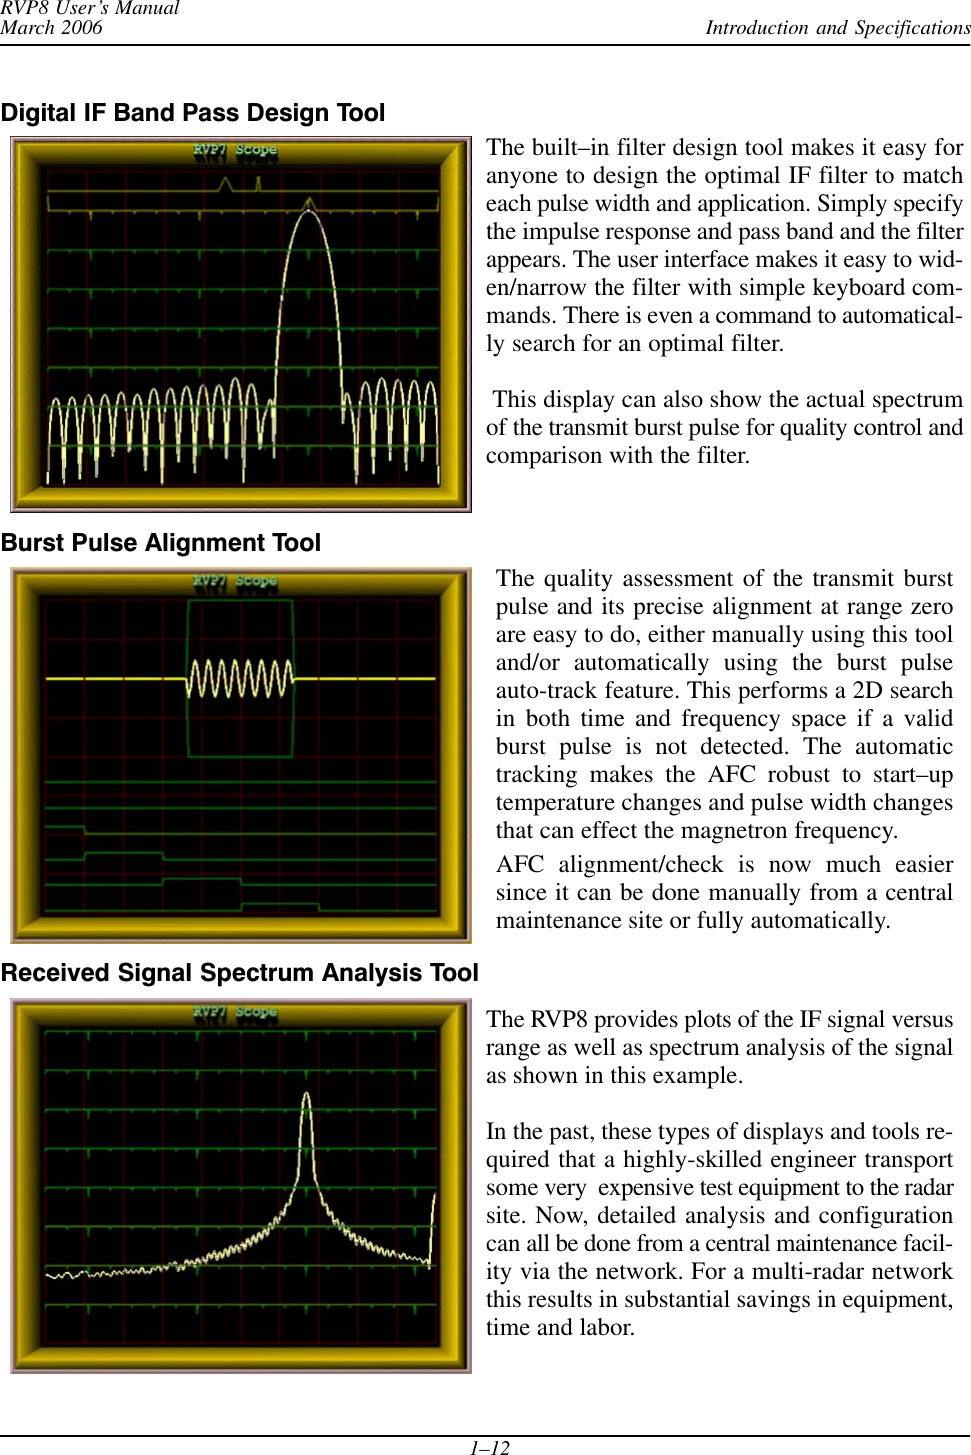 Introduction and SpecificationsRVP8 User’s ManualMarch 20061–12Digital IF Band Pass Design ToolThe built–in filter design tool makes it easy foranyone to design the optimal IF filter to matcheach pulse width and application. Simply specifythe impulse response and pass band and the filterappears. The user interface makes it easy to wid-en/narrow the filter with simple keyboard com-mands. There is even a command to automatical-ly search for an optimal filter. This display can also show the actual spectrumof the transmit burst pulse for quality control andcomparison with the filter.Burst Pulse Alignment ToolThe quality assessment of the transmit burstpulse and its precise alignment at range zeroare easy to do, either manually using this tooland/or automatically using the burst pulseauto-track feature. This performs a 2D searchin both time and frequency space if a validburst pulse is not detected. The automatictracking makes the AFC robust to start–uptemperature changes and pulse width changesthat can effect the magnetron frequency.AFC alignment/check is now much easiersince it can be done manually from a centralmaintenance site or fully automatically.Received Signal Spectrum Analysis ToolThe RVP8 provides plots of the IF signal versusrange as well as spectrum analysis of the signalas shown in this example.In the past, these types of displays and tools re-quired that a highly-skilled engineer transportsome very  expensive test equipment to the radarsite. Now, detailed analysis and configurationcan all be done from a central maintenance facil-ity via the network. For a multi-radar networkthis results in substantial savings in equipment,time and labor.